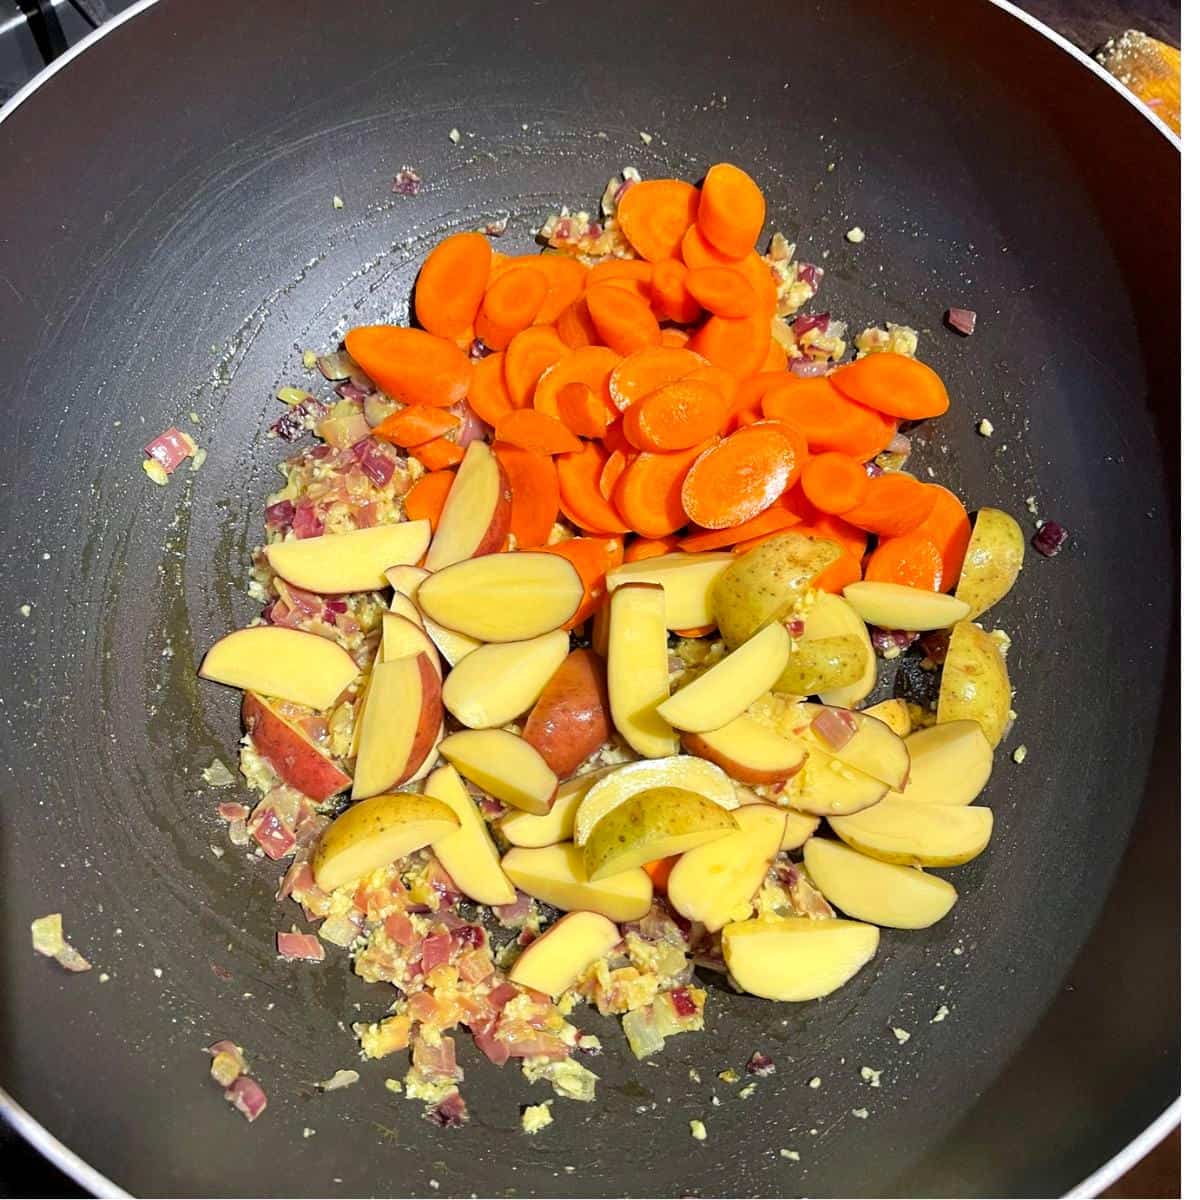 Carrots and potatoes added to tikil gomen wok.